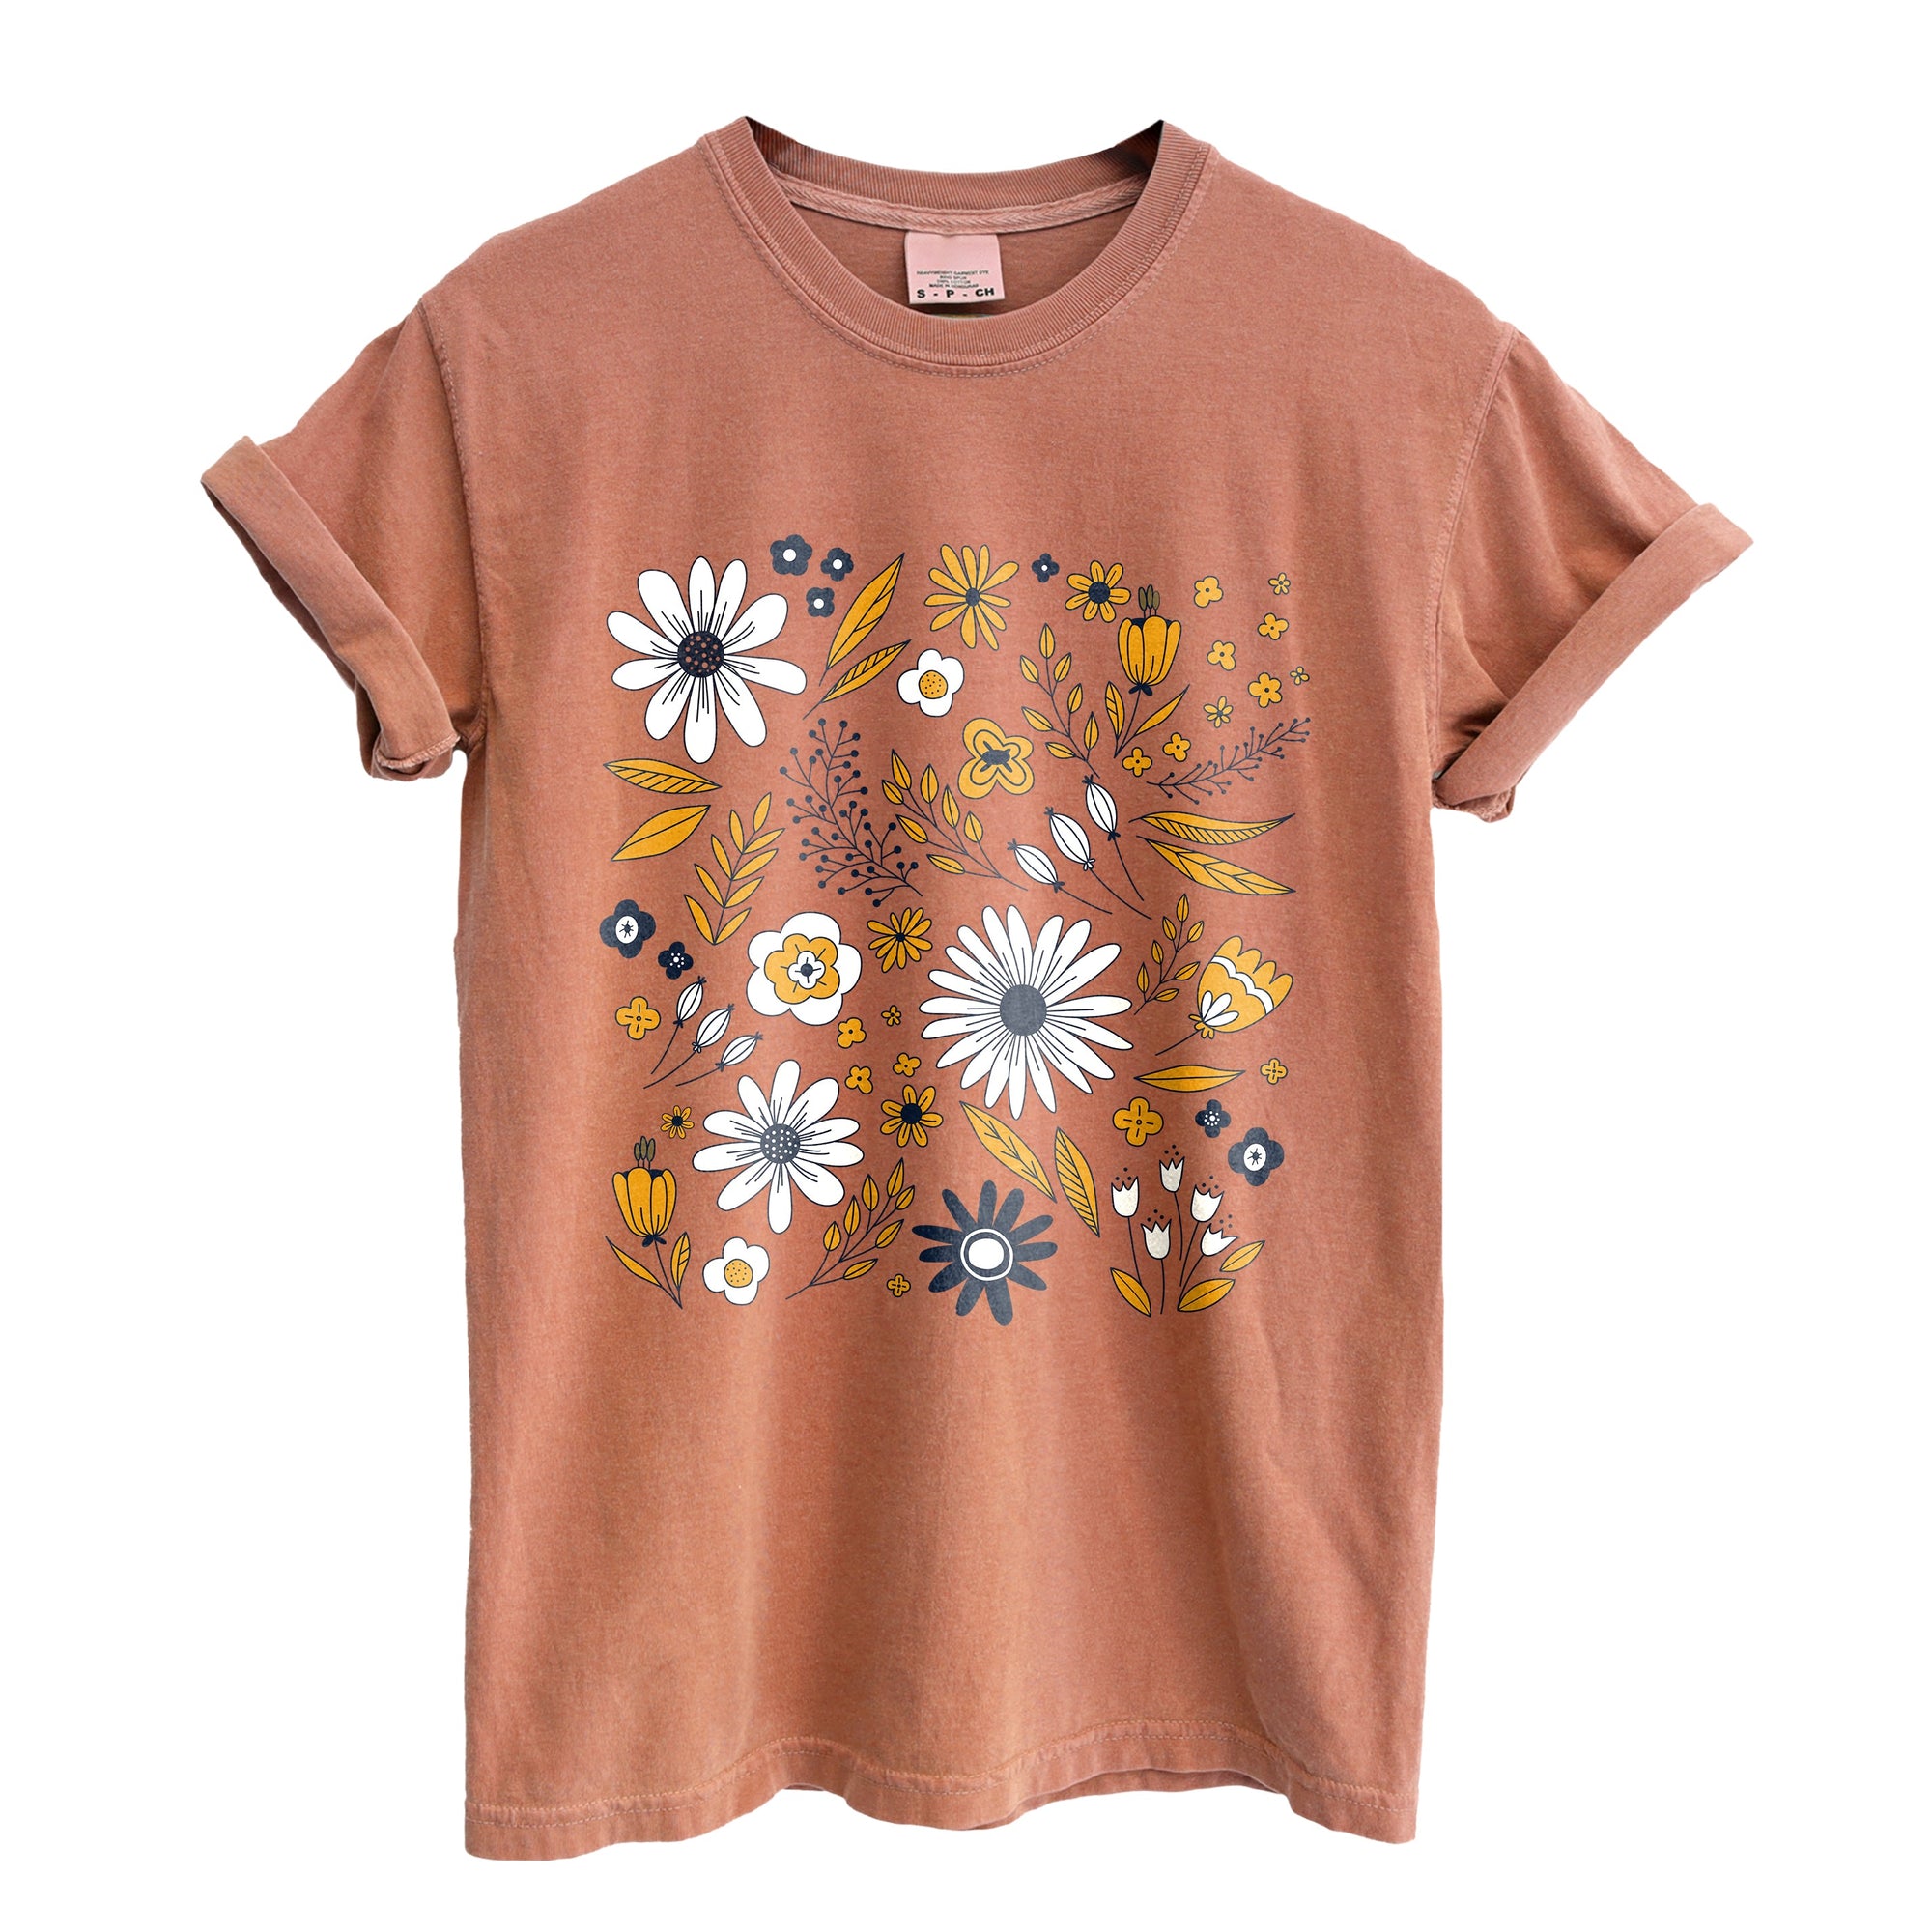 Wildflower Field Garment-Dyed Tee - Stories You Can Wear